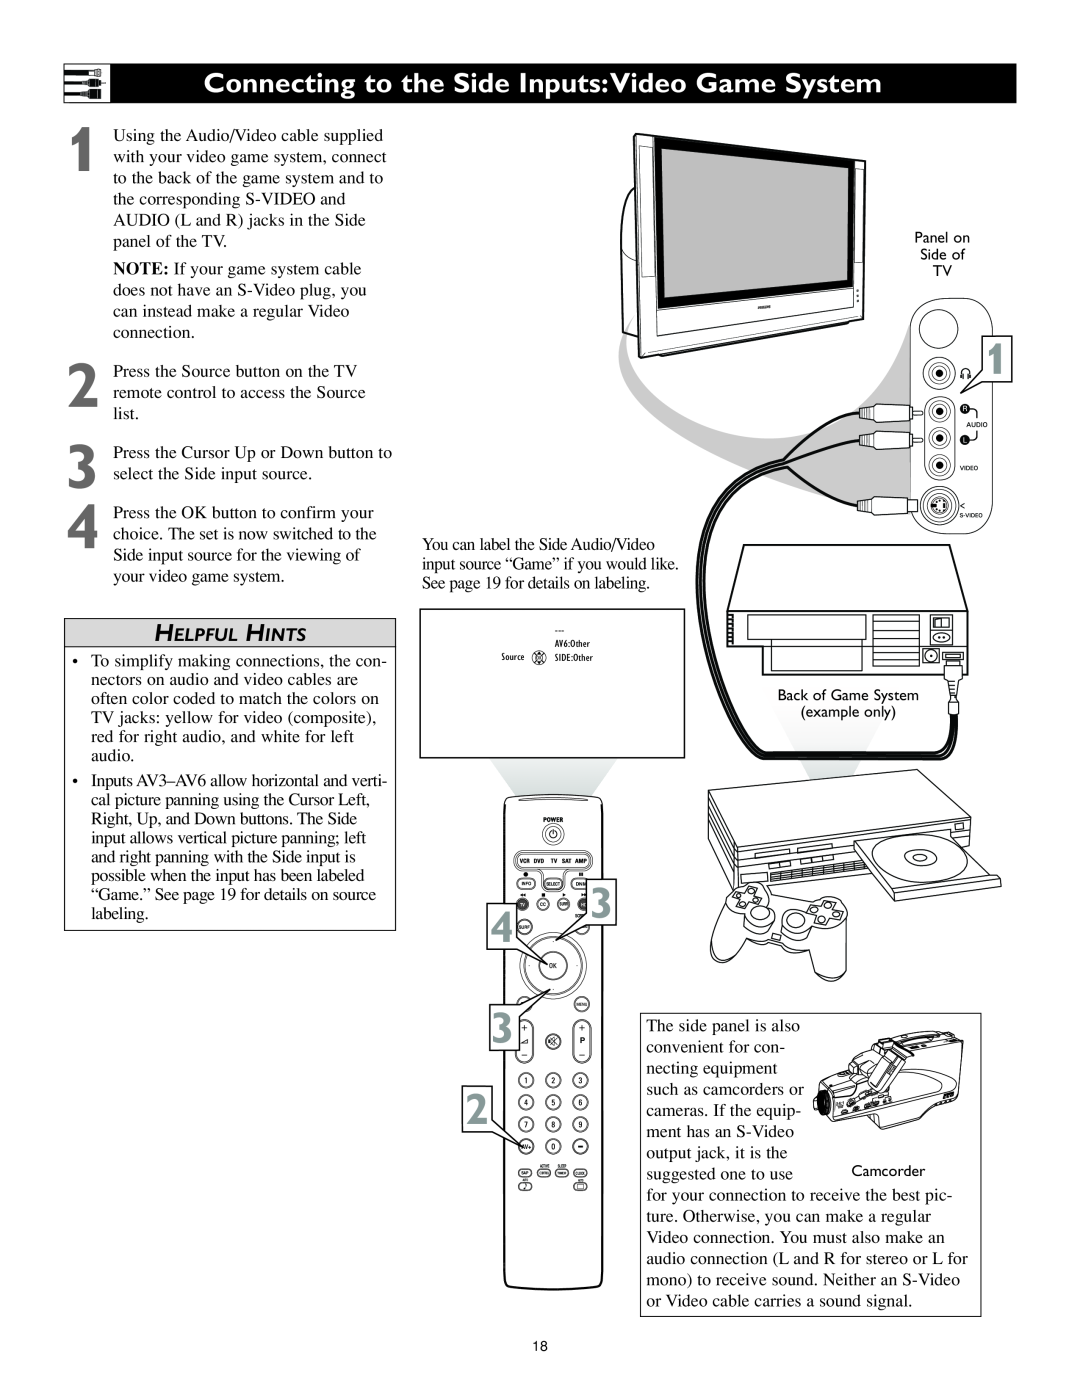 Philips 62PL9524, 55PL9524 setup guide Connecting to the Side InputsVideo Game System, Helpful Hints 